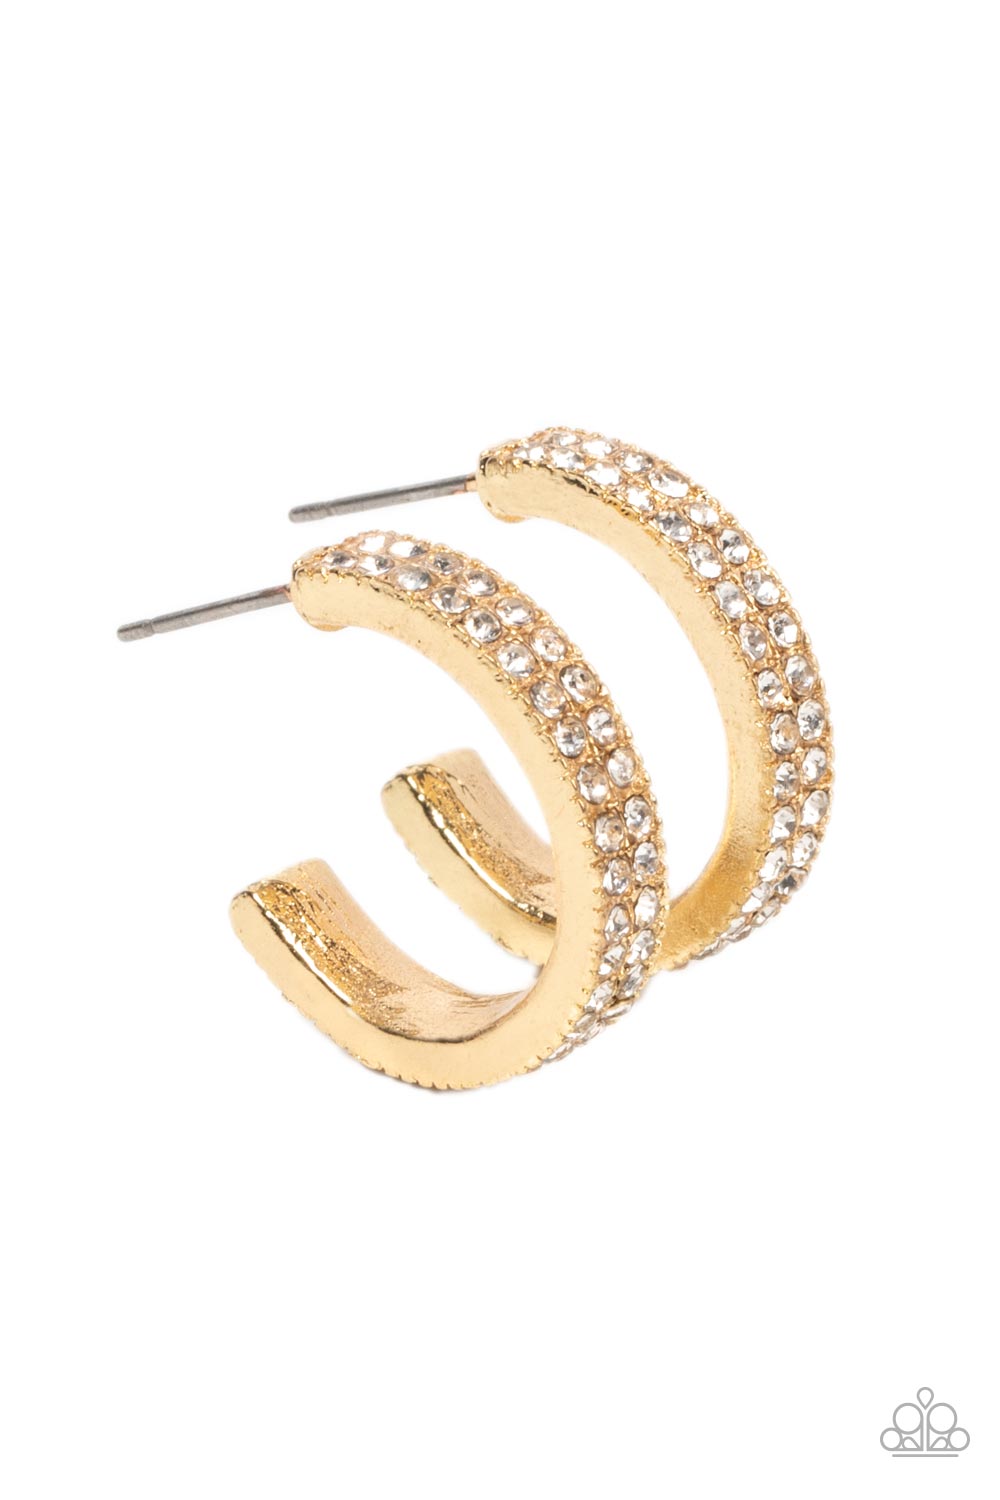 Small Town Twinkle Gold Hoop Earring - Paparazzi Accessories  Two rows of glassy white rhinestones encrust the front of a dainty gold hoop, resulting in a timeless twinkle. Earring attaches to a standard post fitting. Hoop measures approximately 3/4" in diameter.  Sold as one pair of hoop earrings.